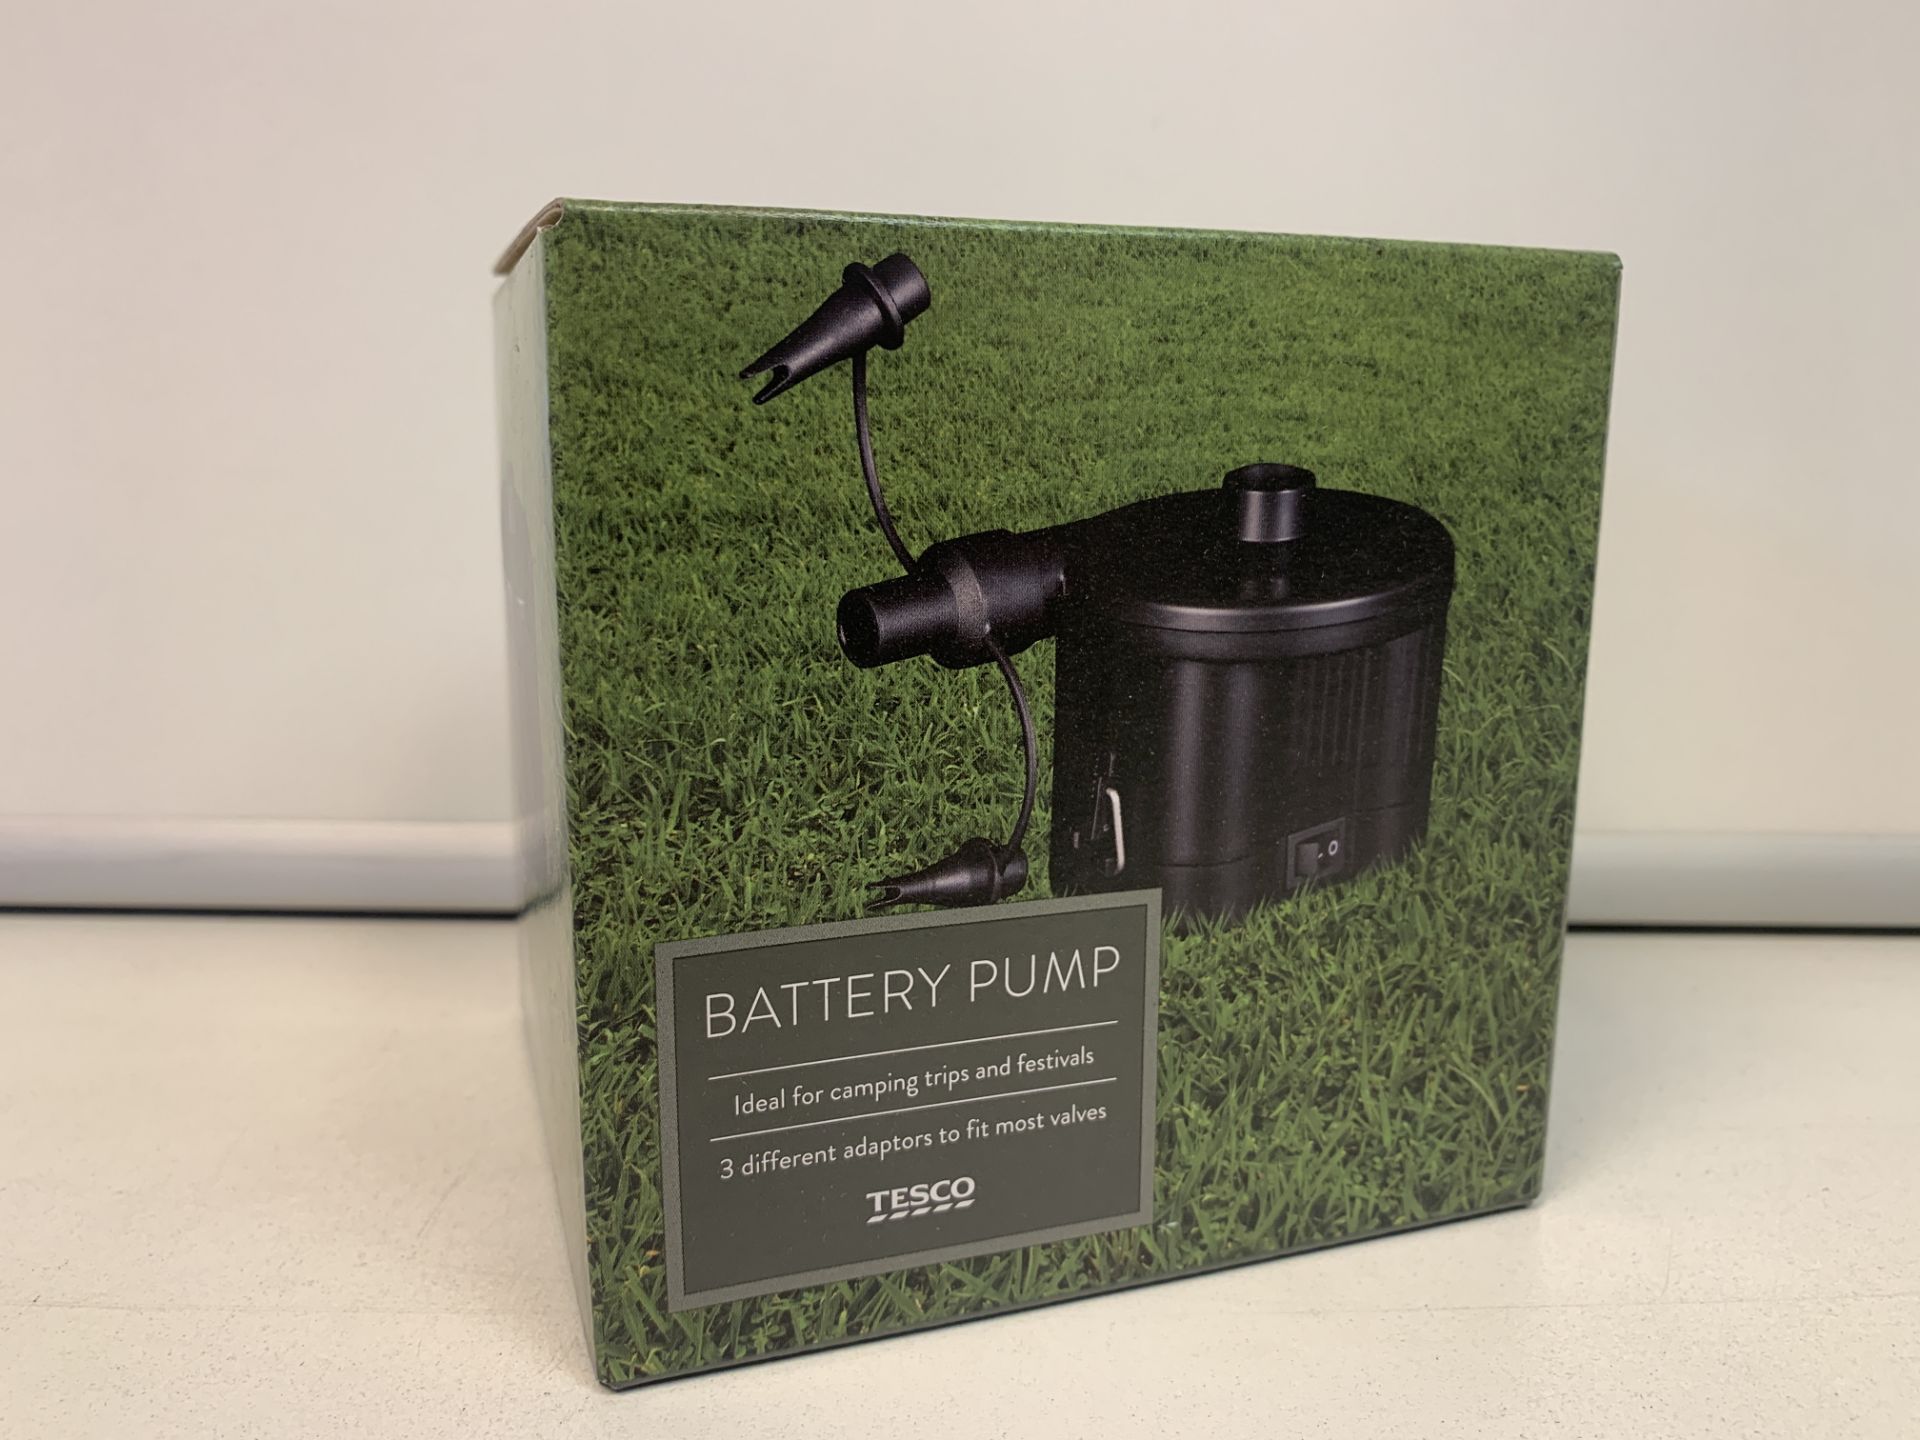 15 X BRAND NEW TESCO BATTERY PUMPS IDEAL FOR CAMPING AND FESTIVALS R19